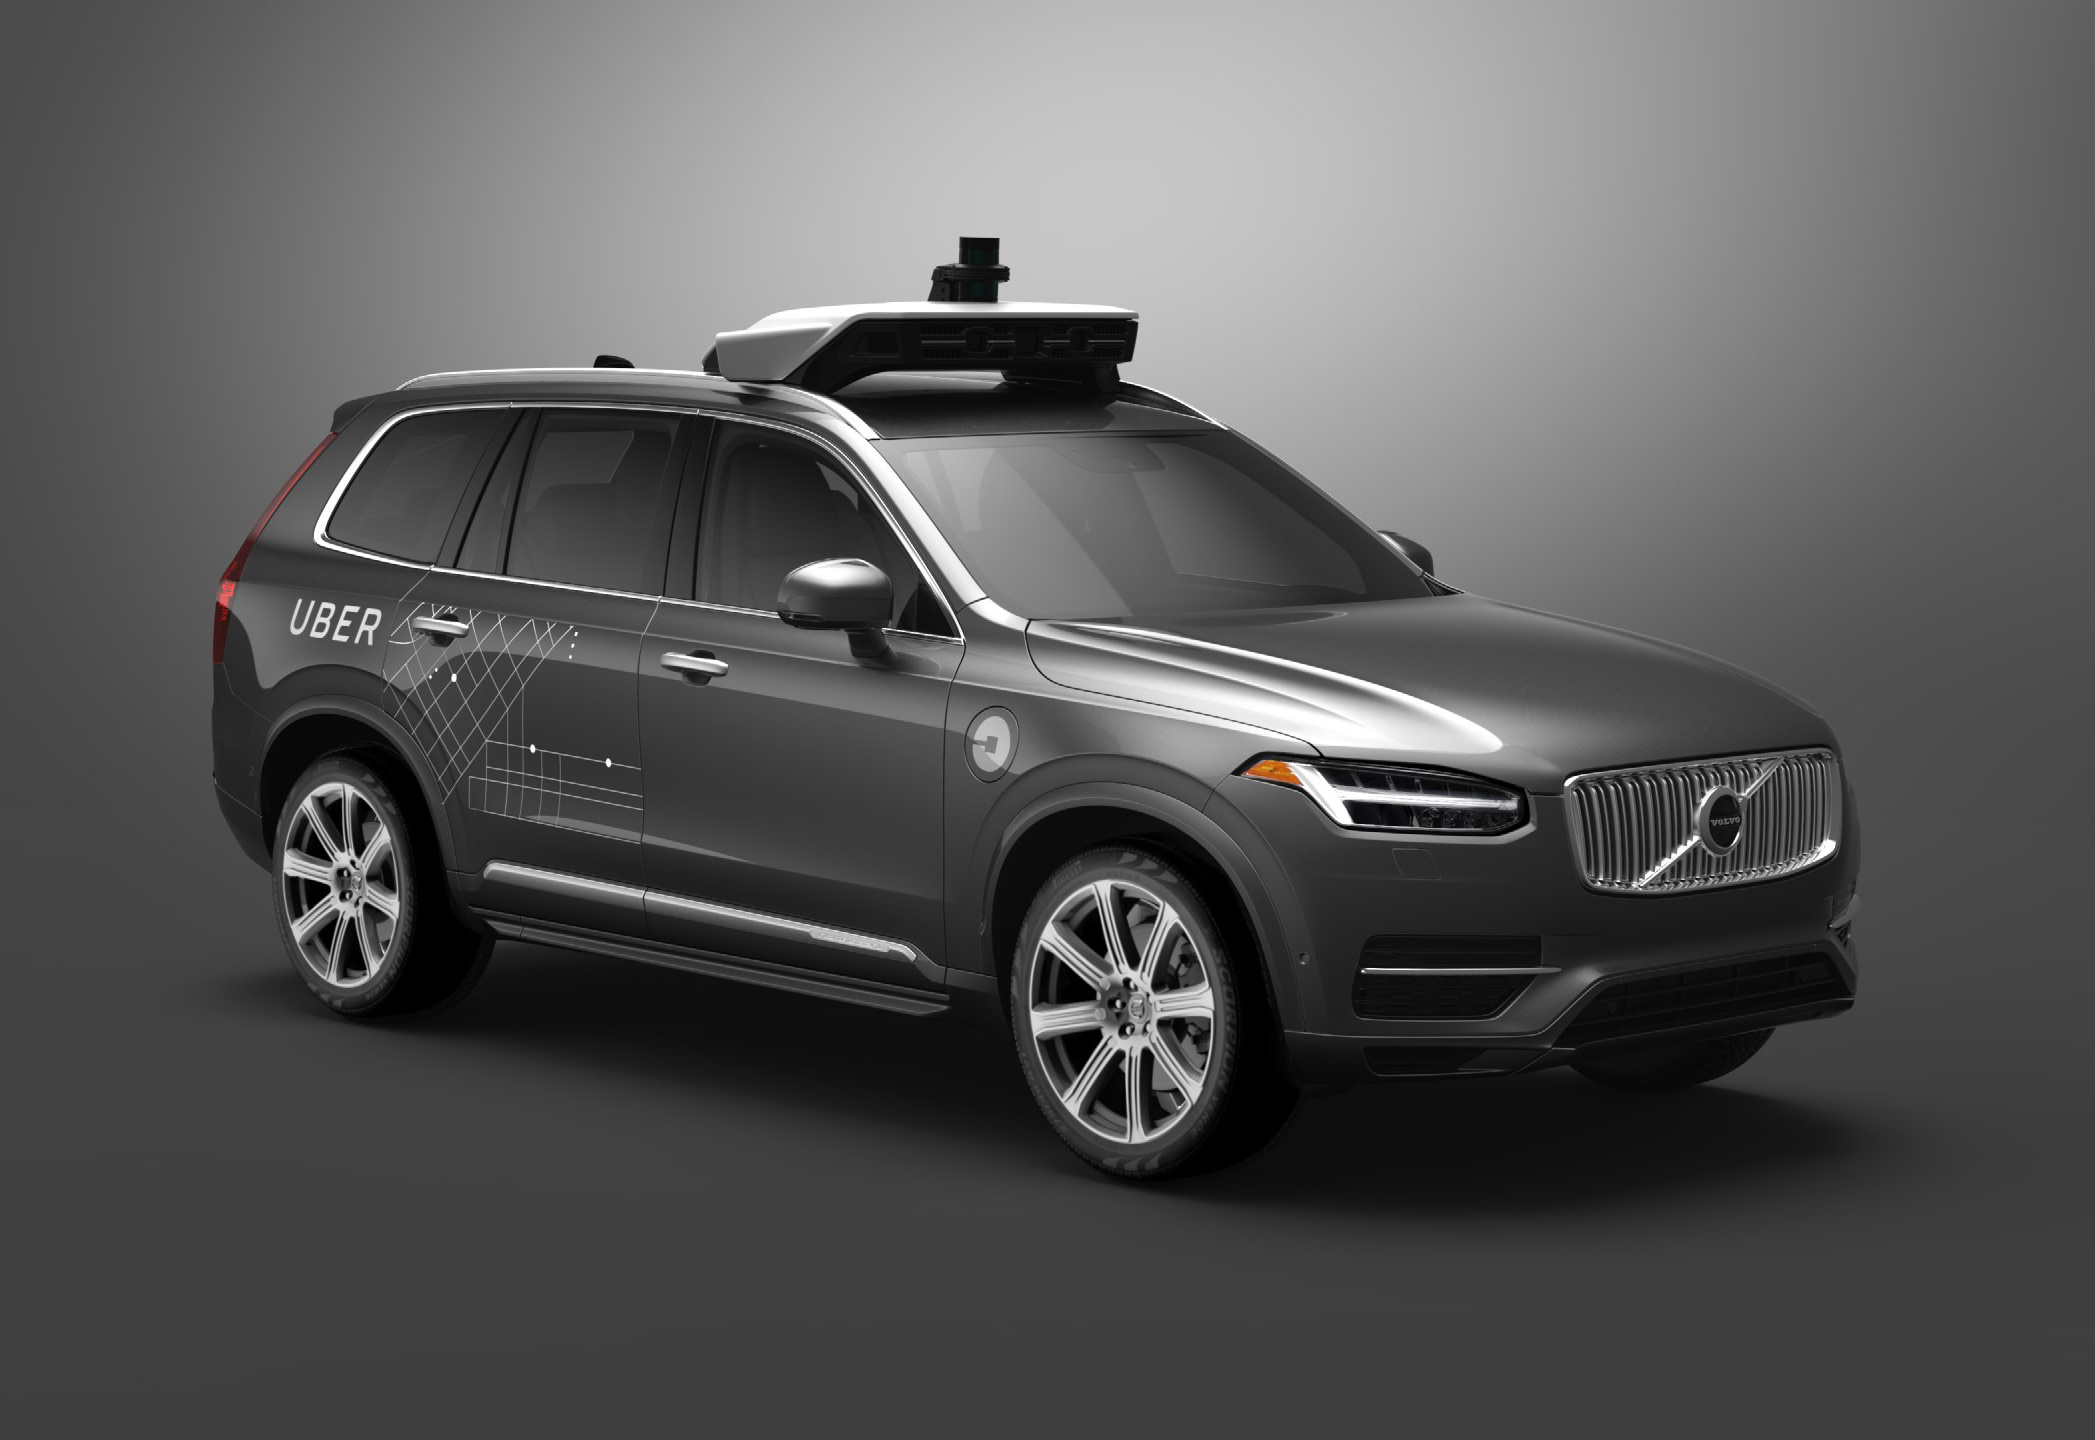 194850_Volvo_Cars_and_Uber_join_forces_to_develop_autonomous_driving_cars.jpg